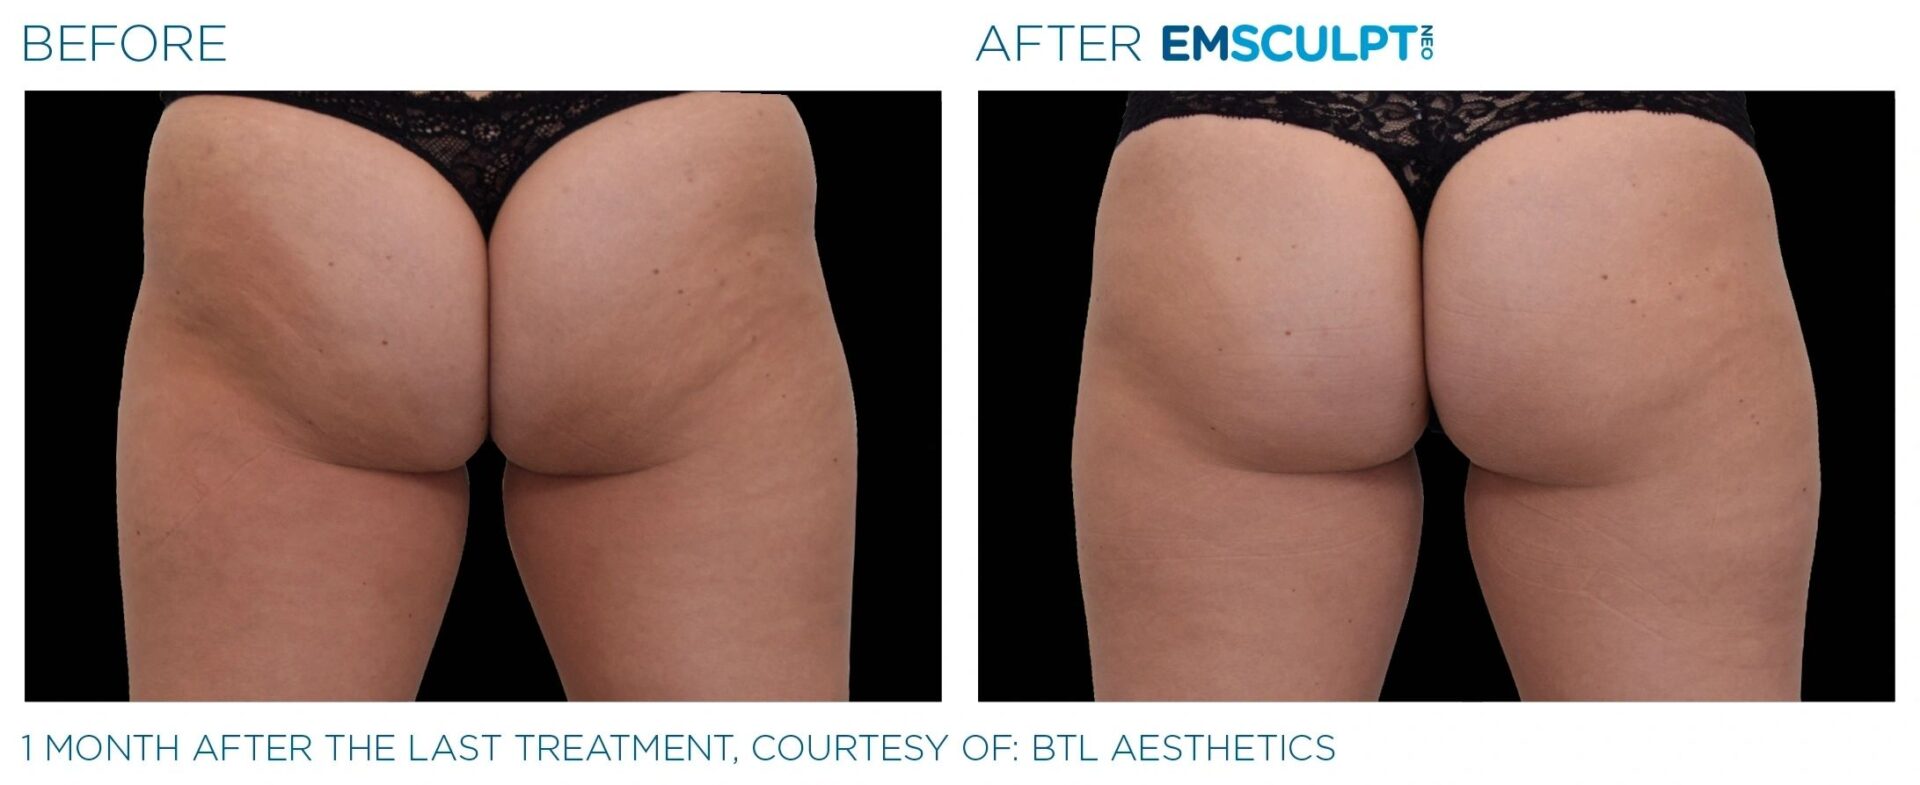 A before and after picture of an emsculpt treatment.